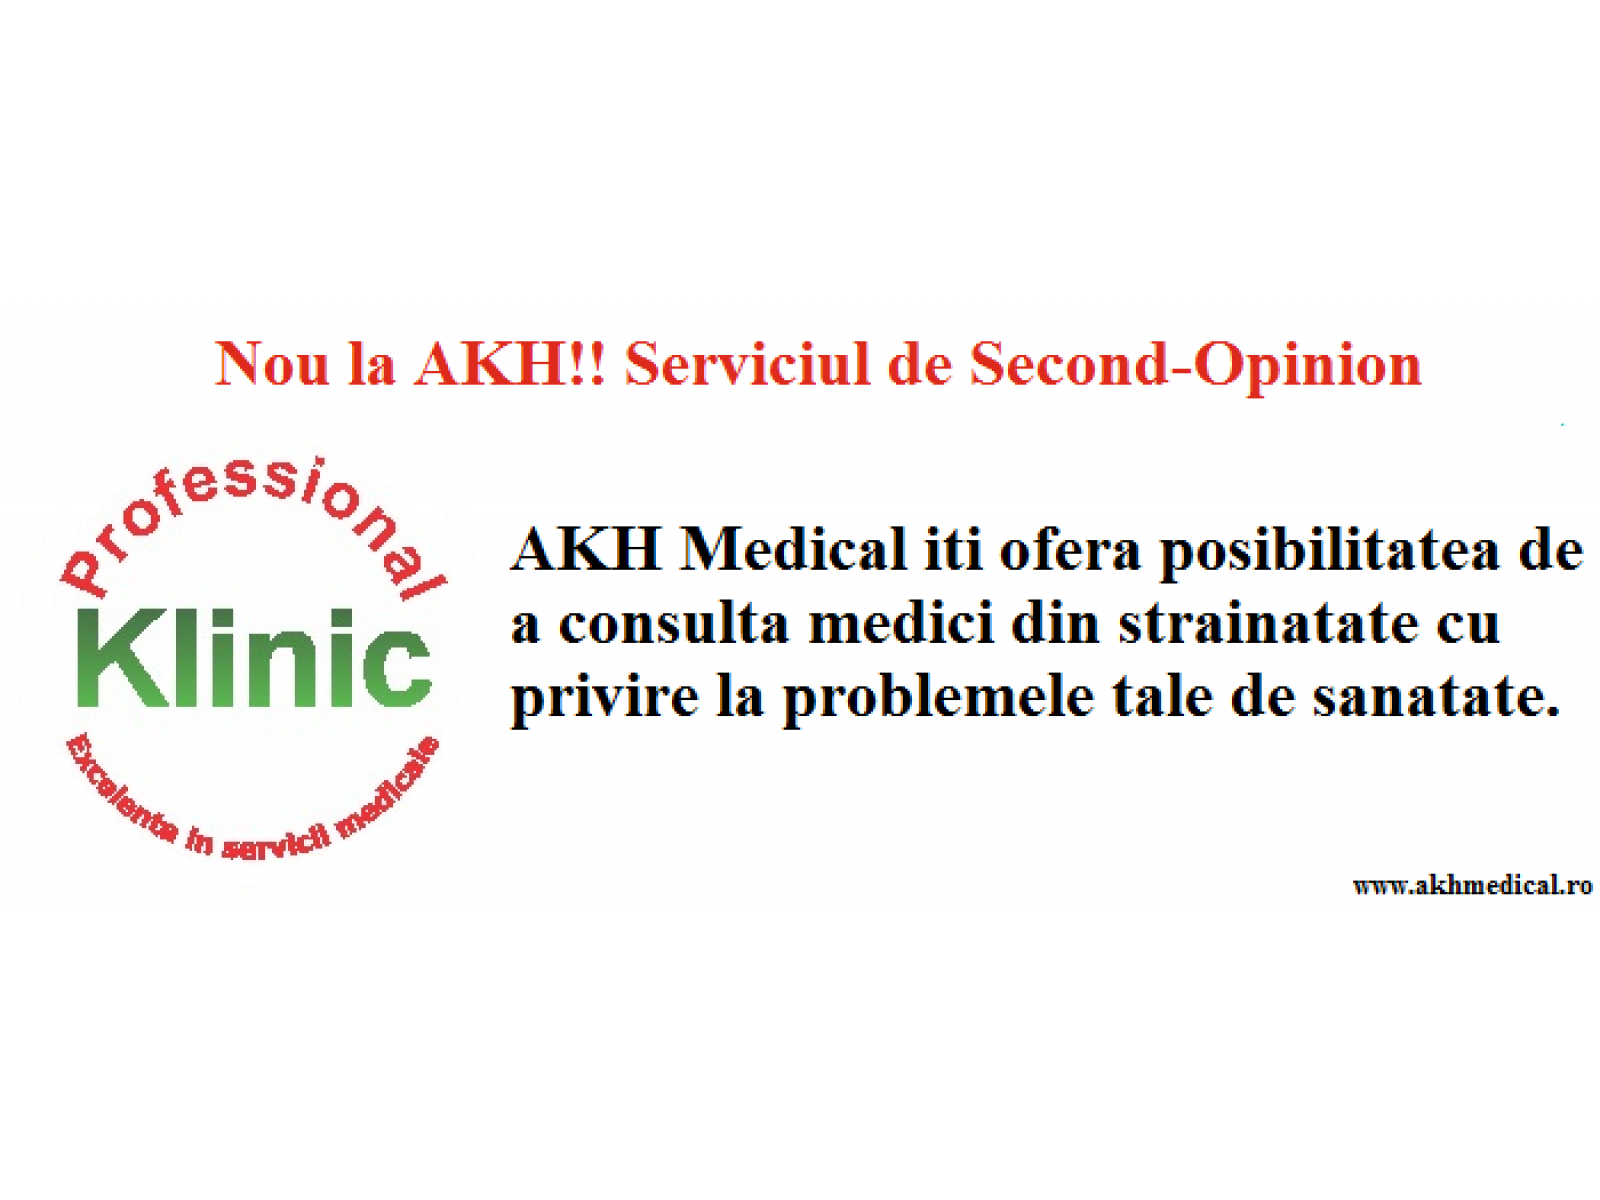 Professional Klinic - second_opinion.png